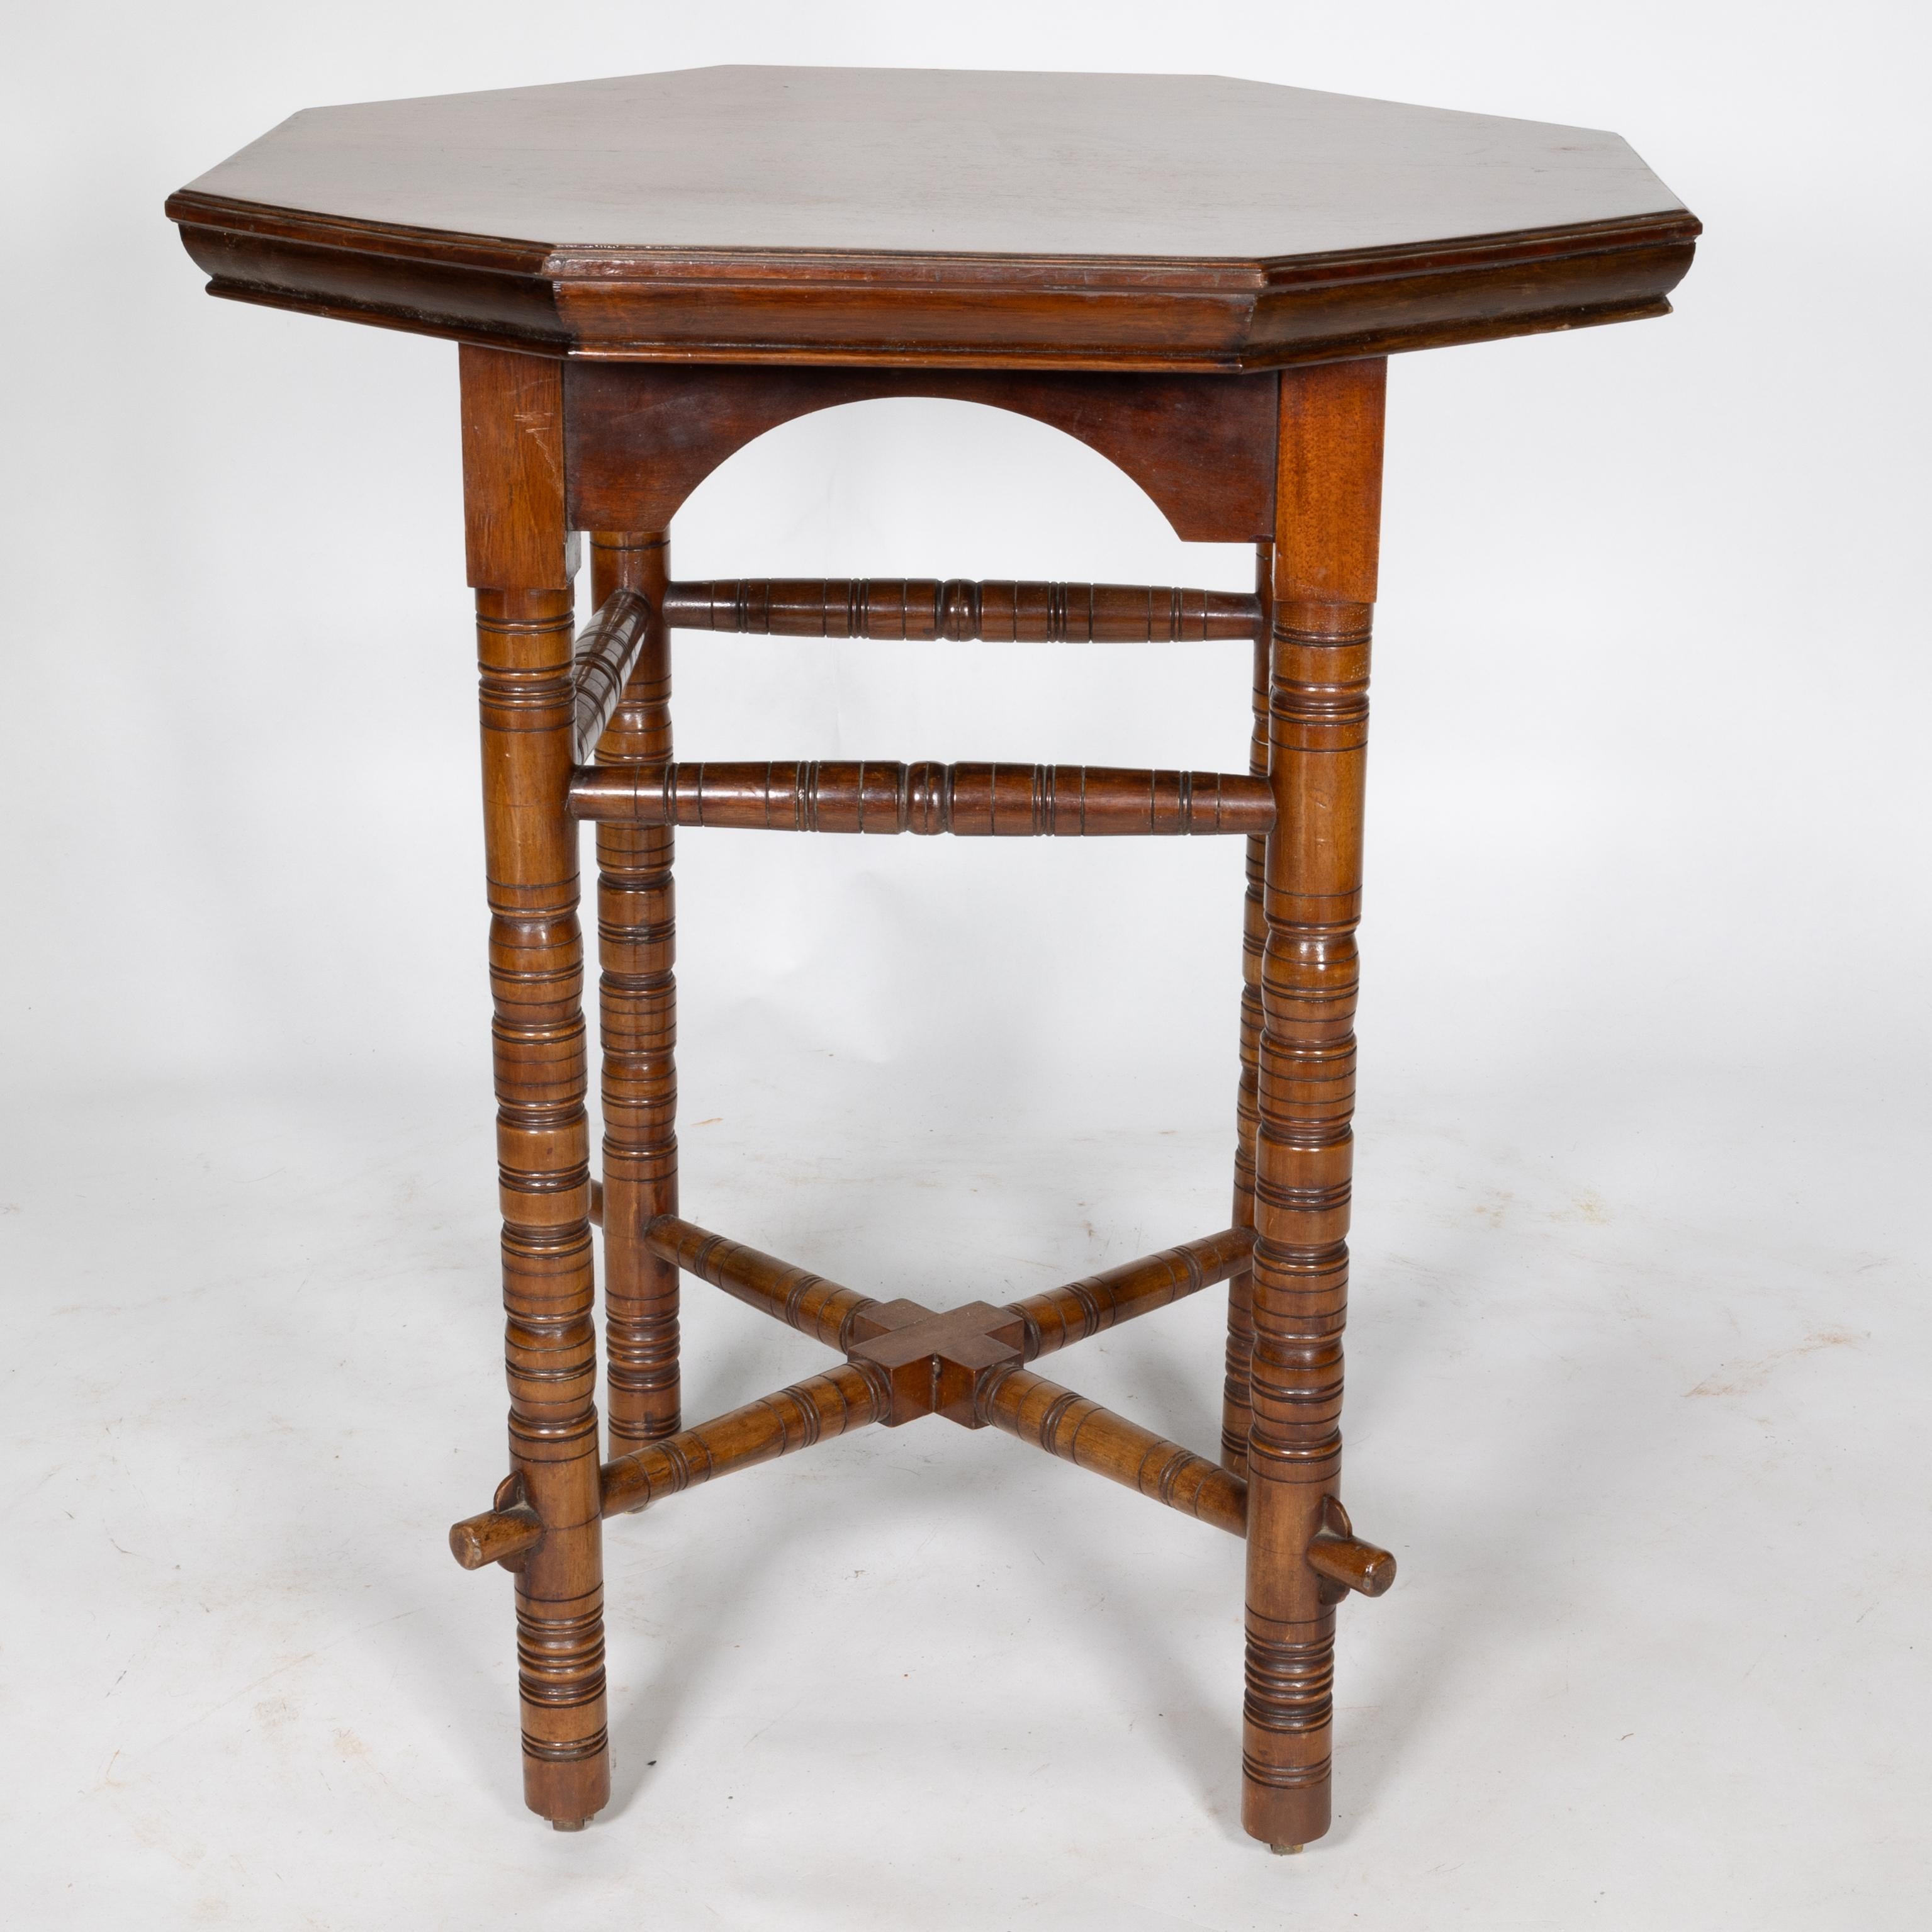 English E W Godwin (style of). An Aesthetic Movement walnut octagonal table For Sale